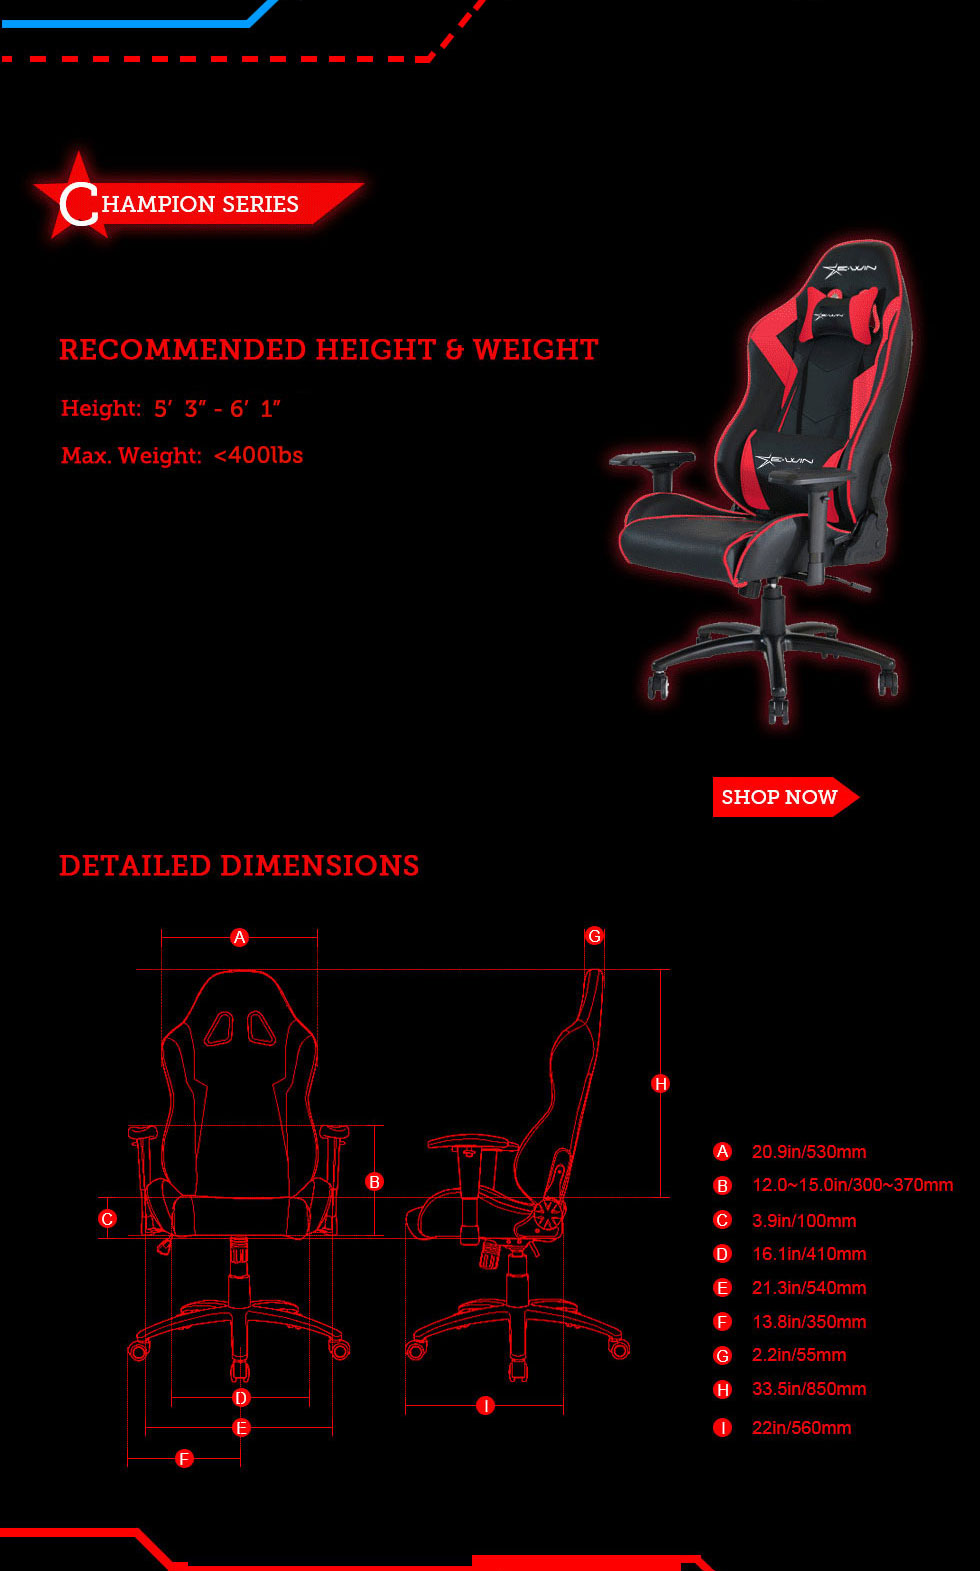 Dimensions of E-WIN Champion Series Gaming Chairs